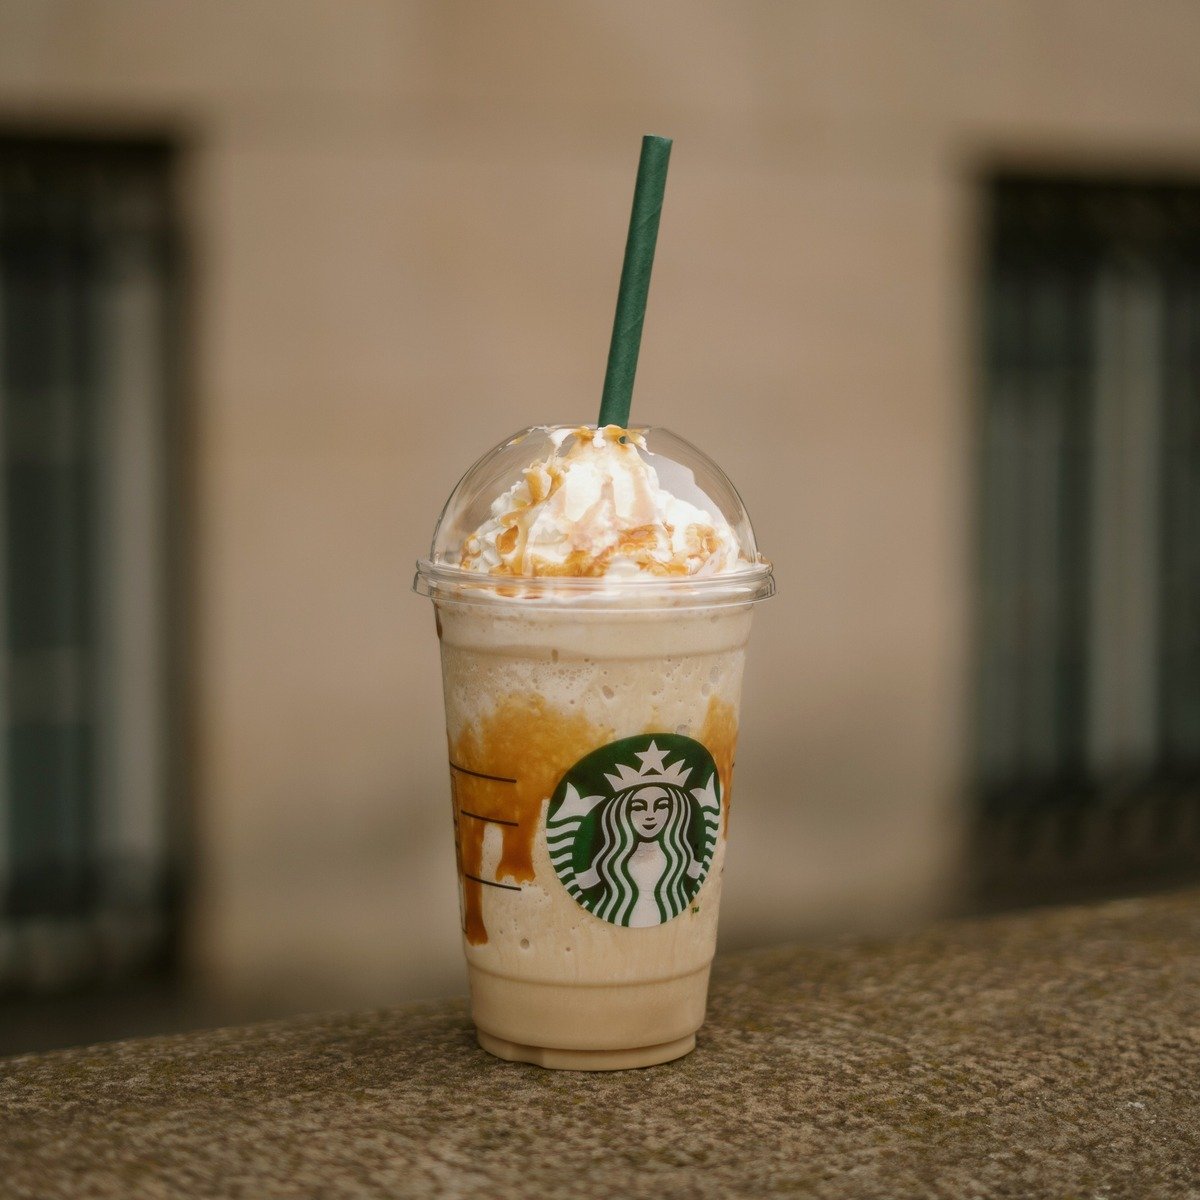 cup of starbucks frappuccino on stone pavement